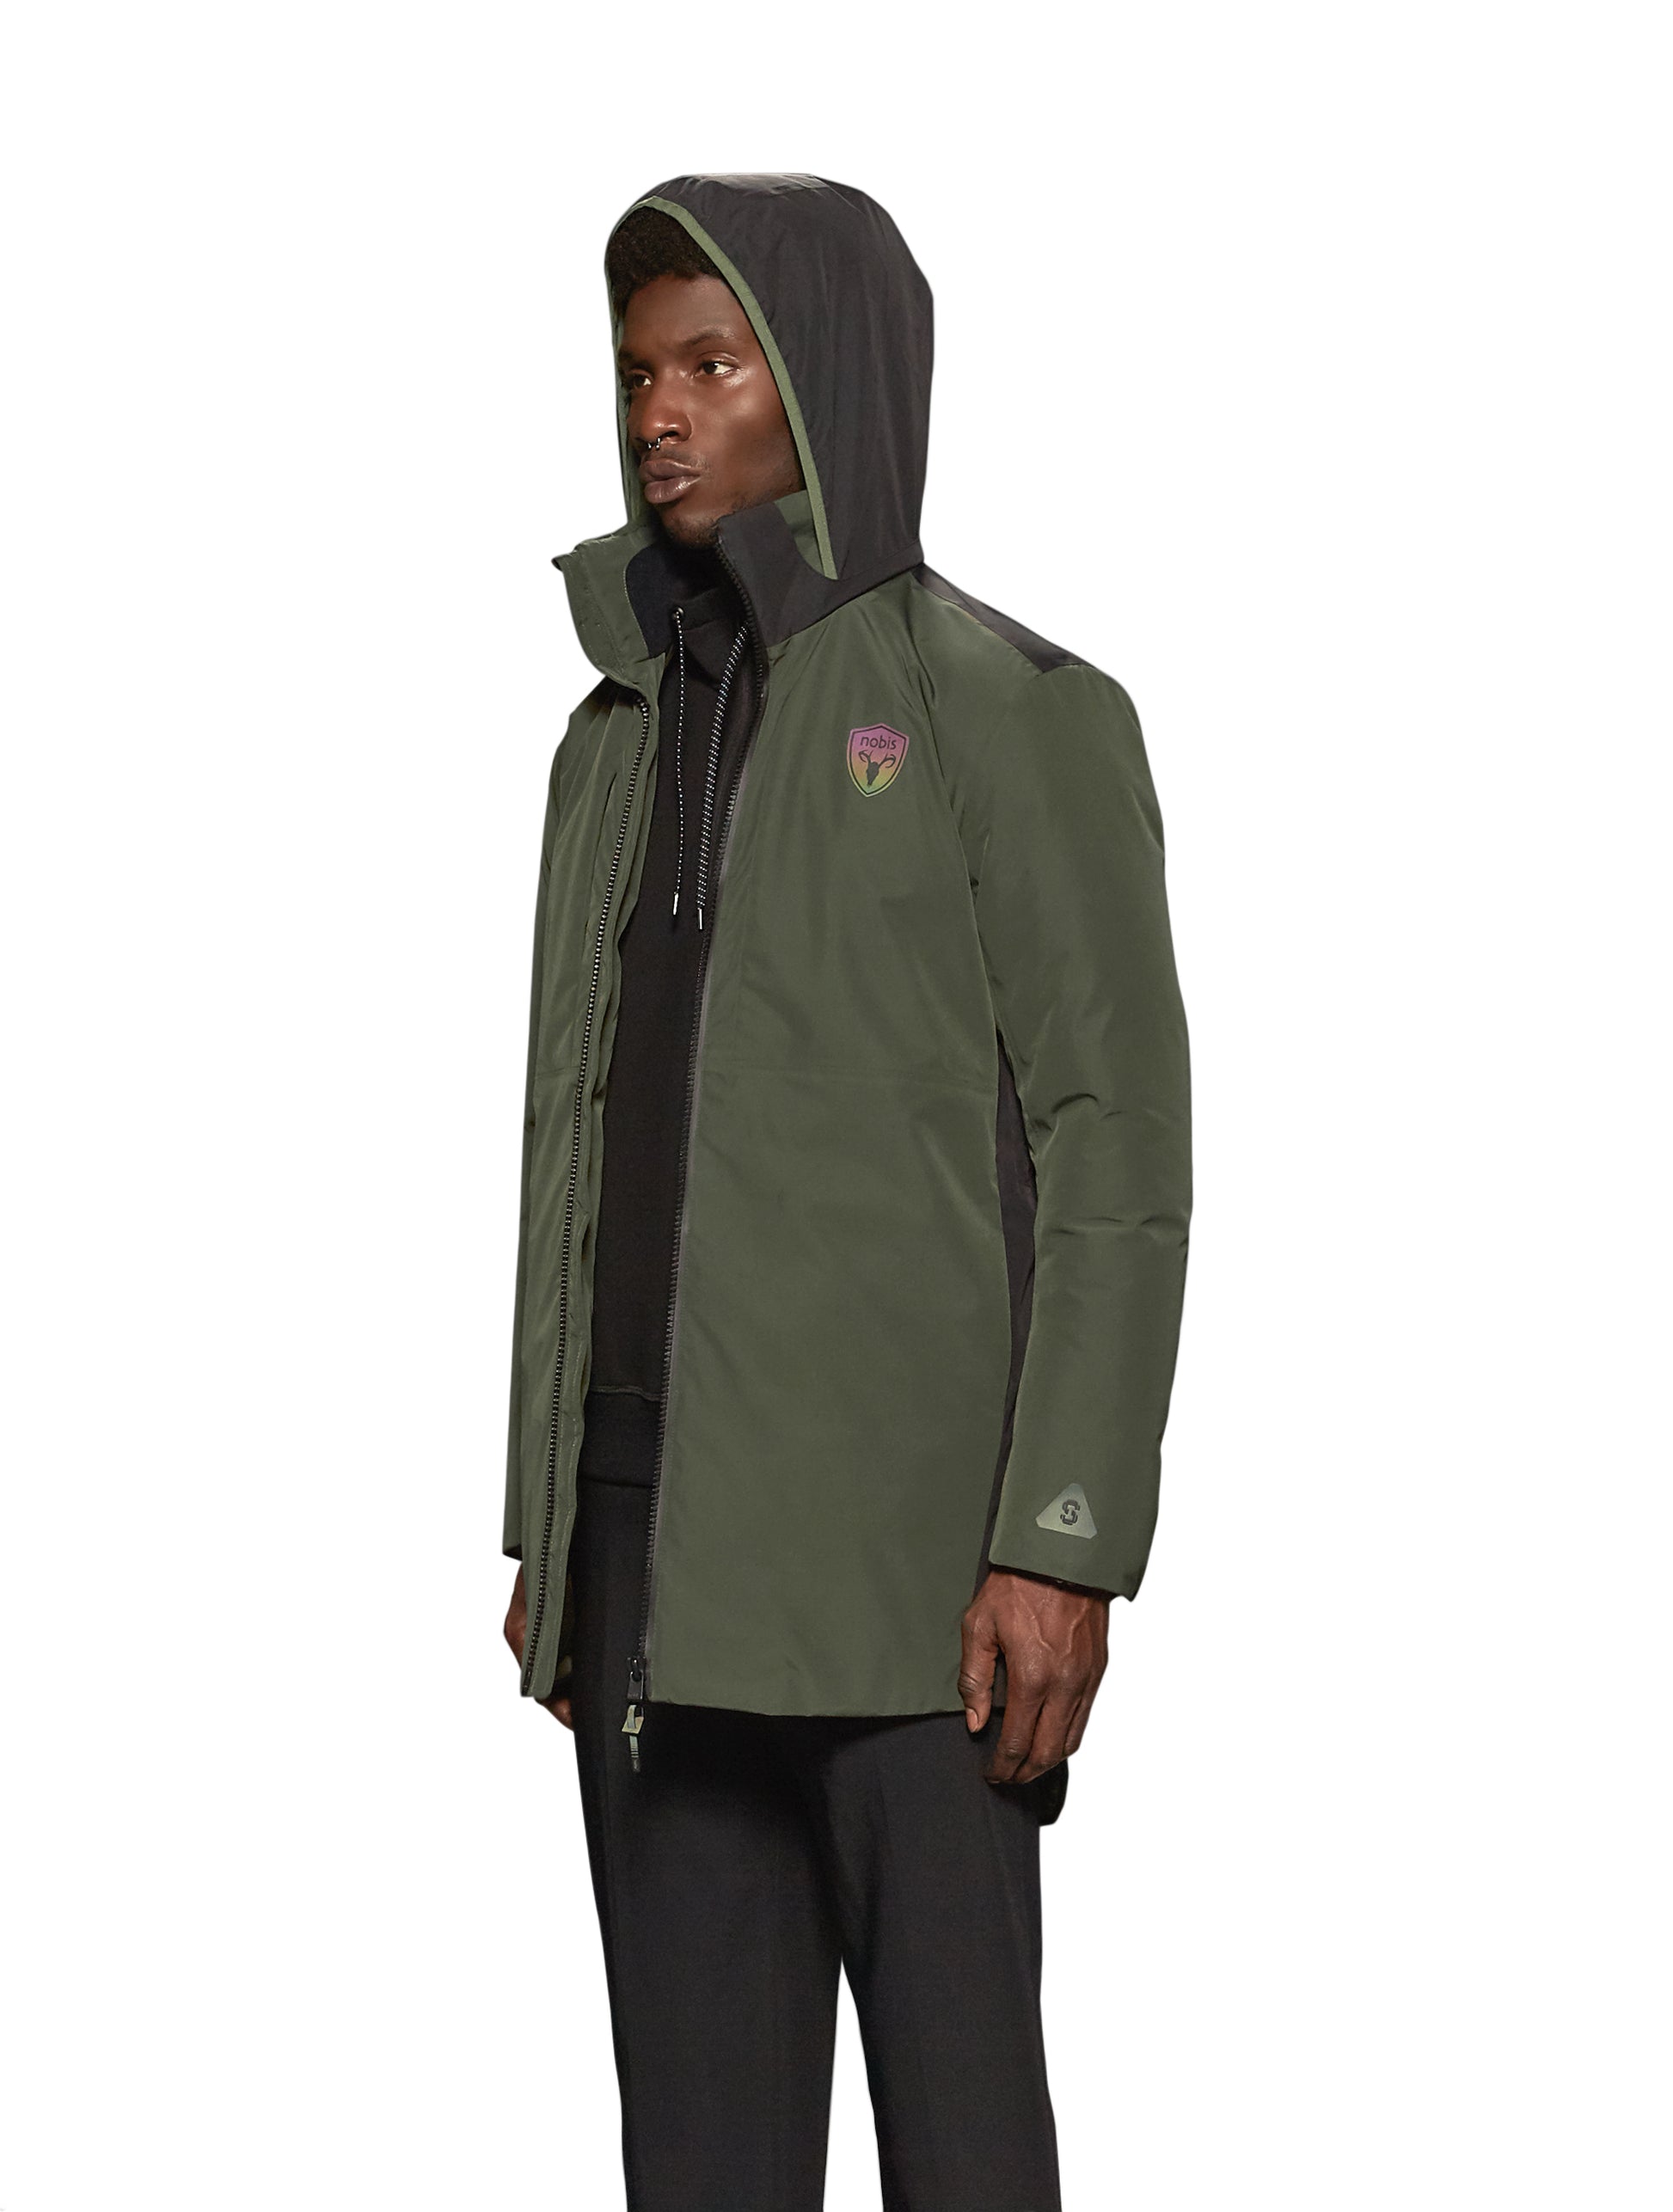 Unisex thigh length down parka with a contrast colour back panel, hidable waterproof hood, and hidden zipper pockets at chest and waist, in Fatigue/Black